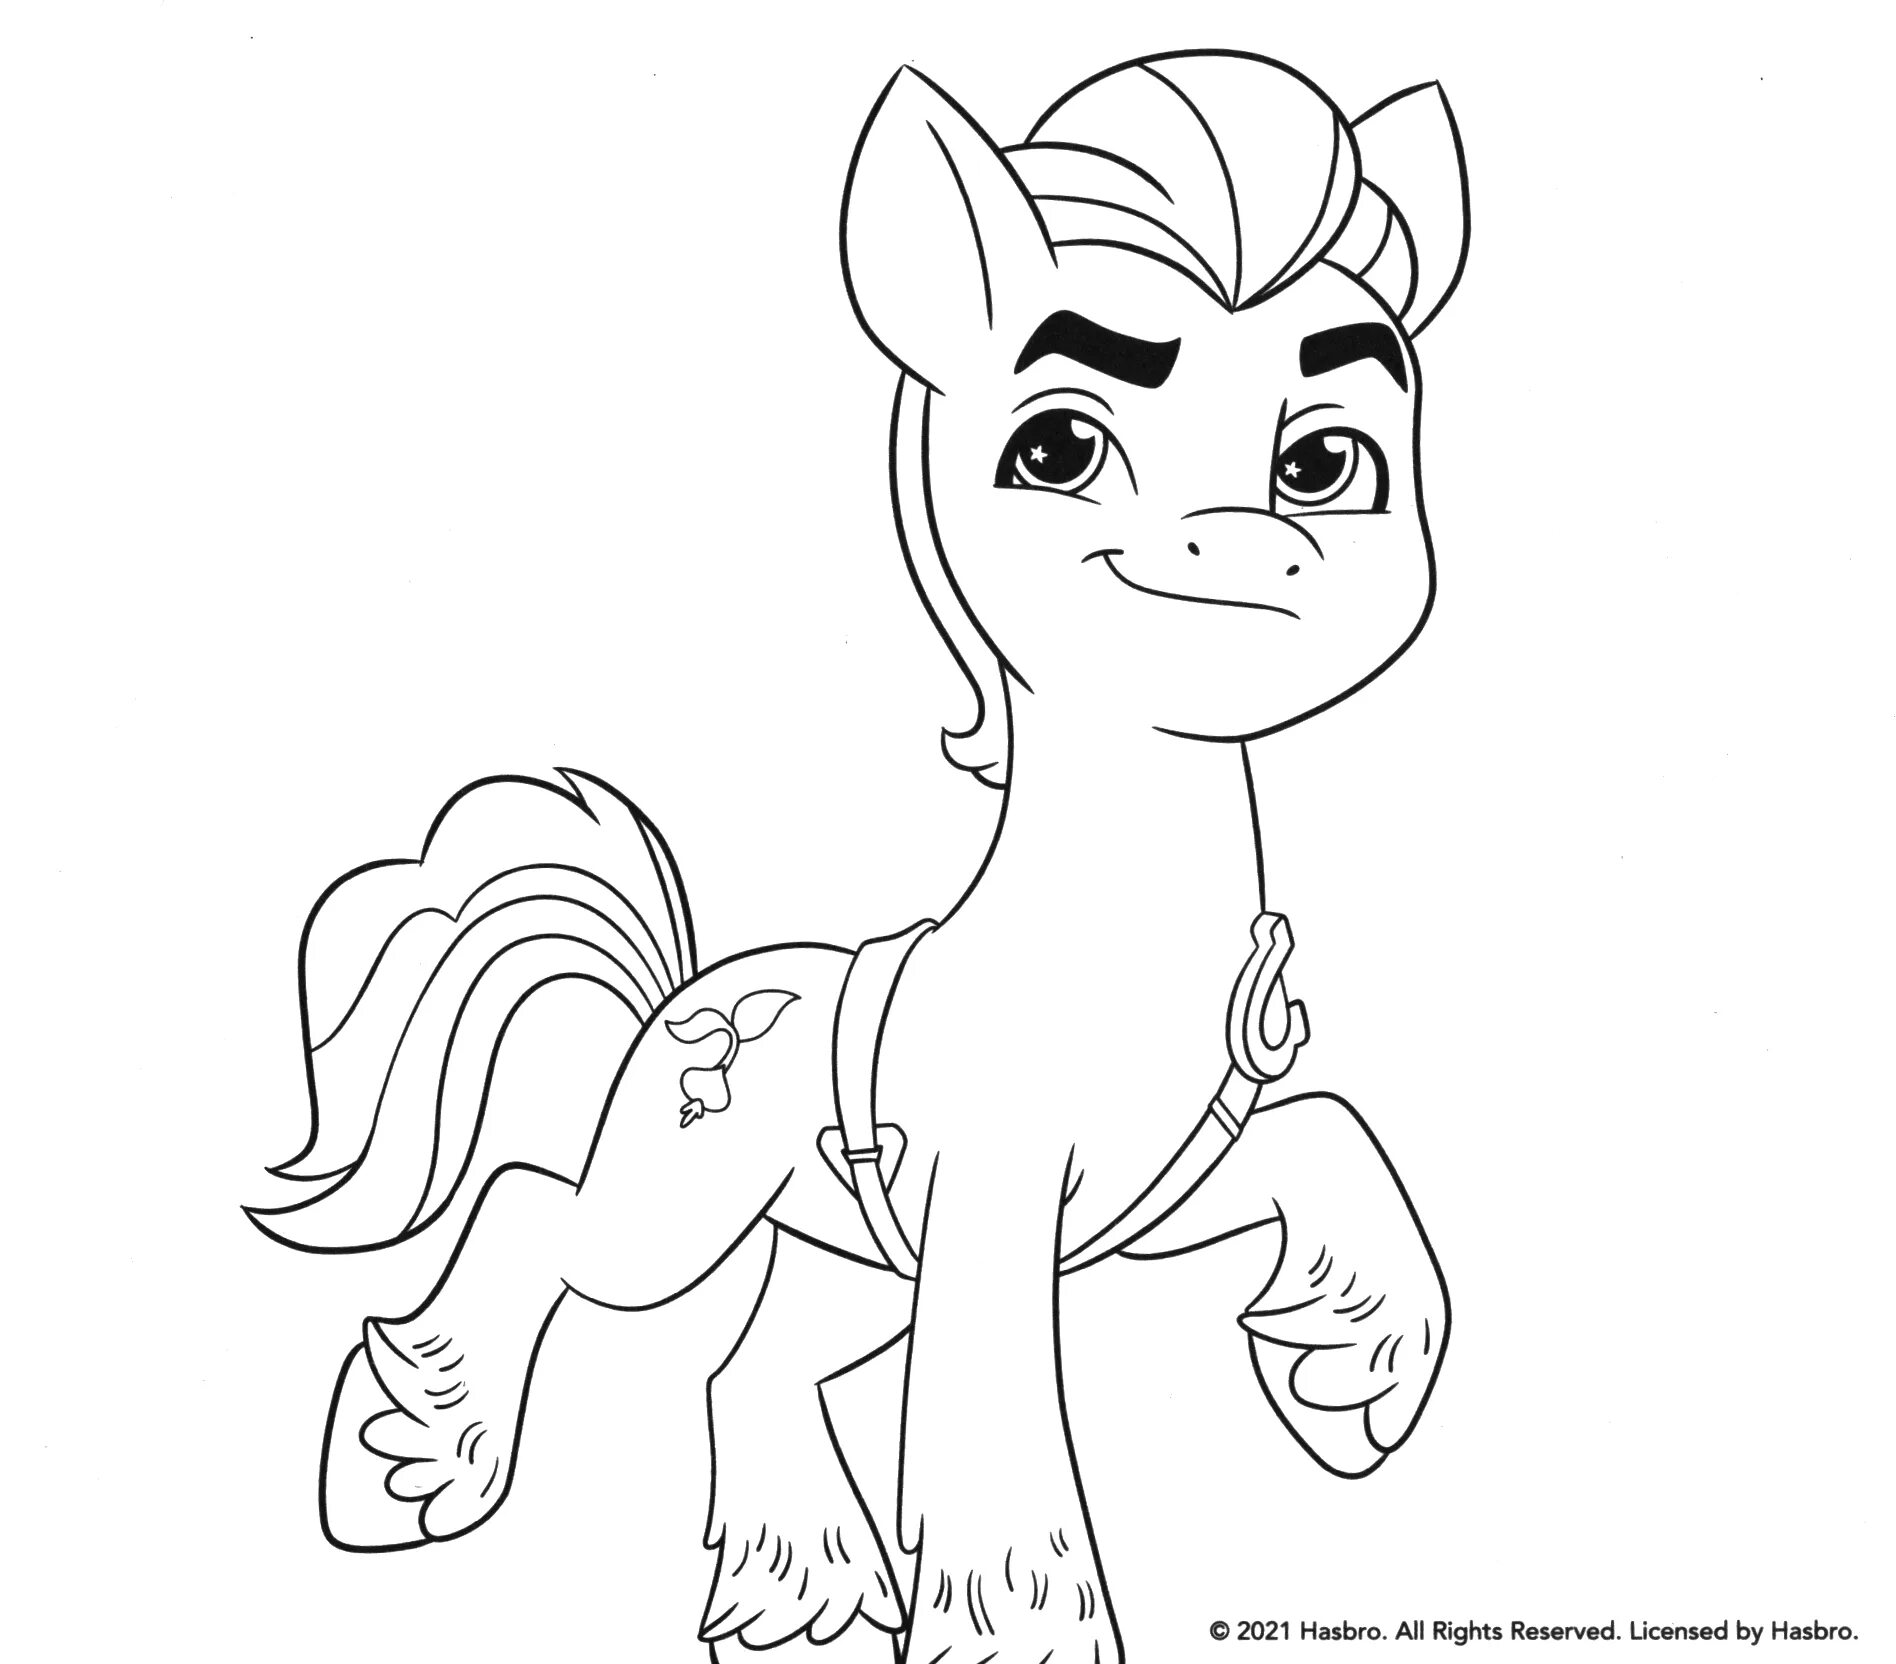 Coloring page shining pony izzy